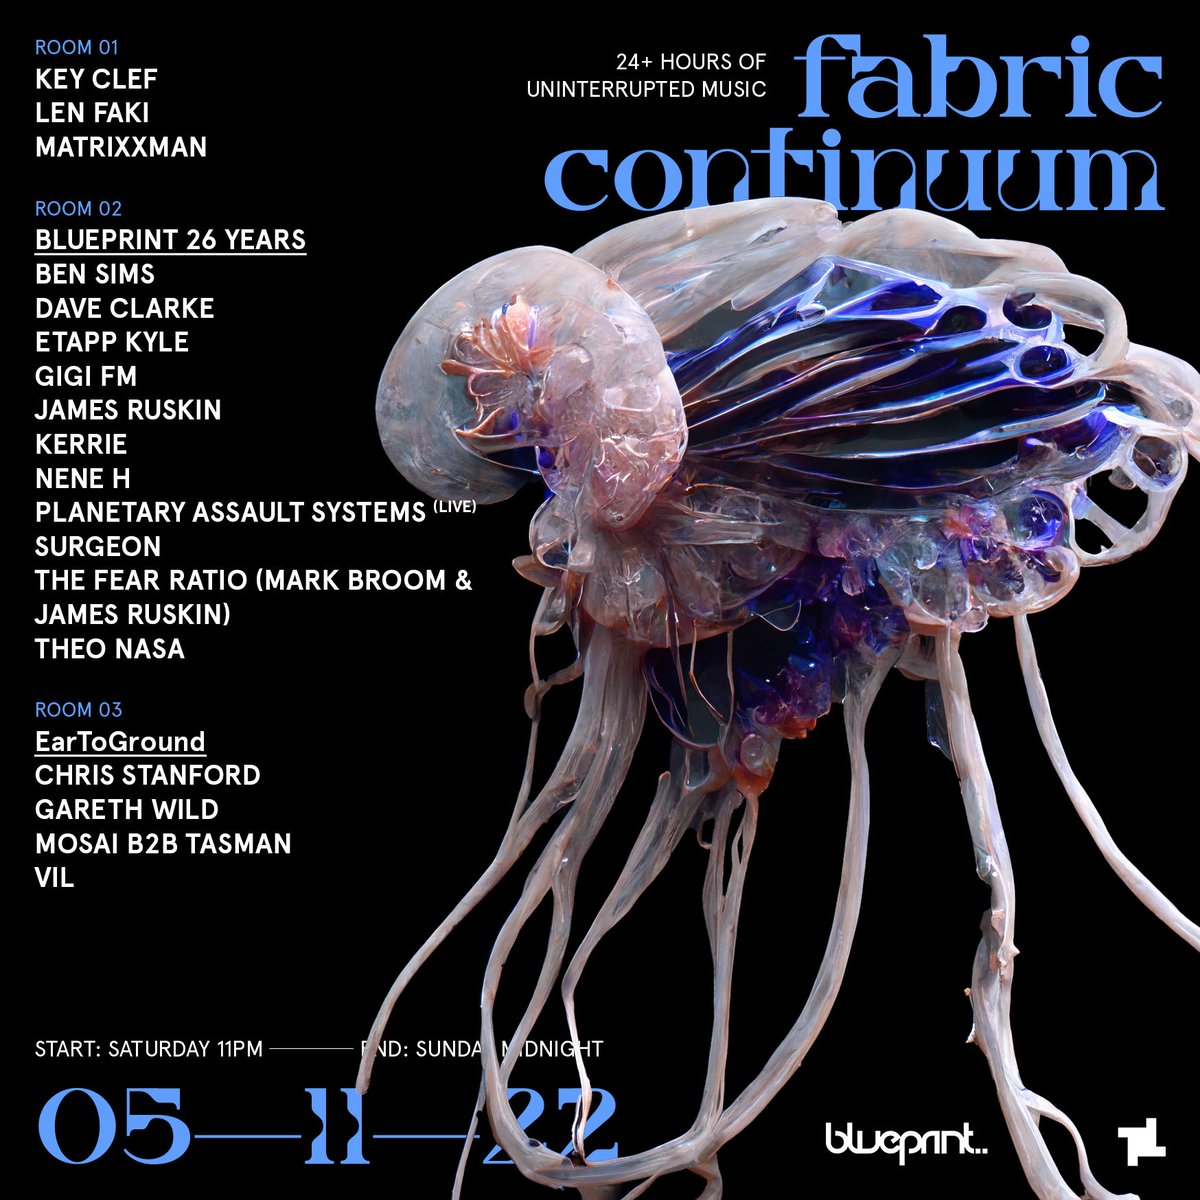 It’s going to be a big one! ⁦@fabriclondon⁩ ra.co/events/1565516